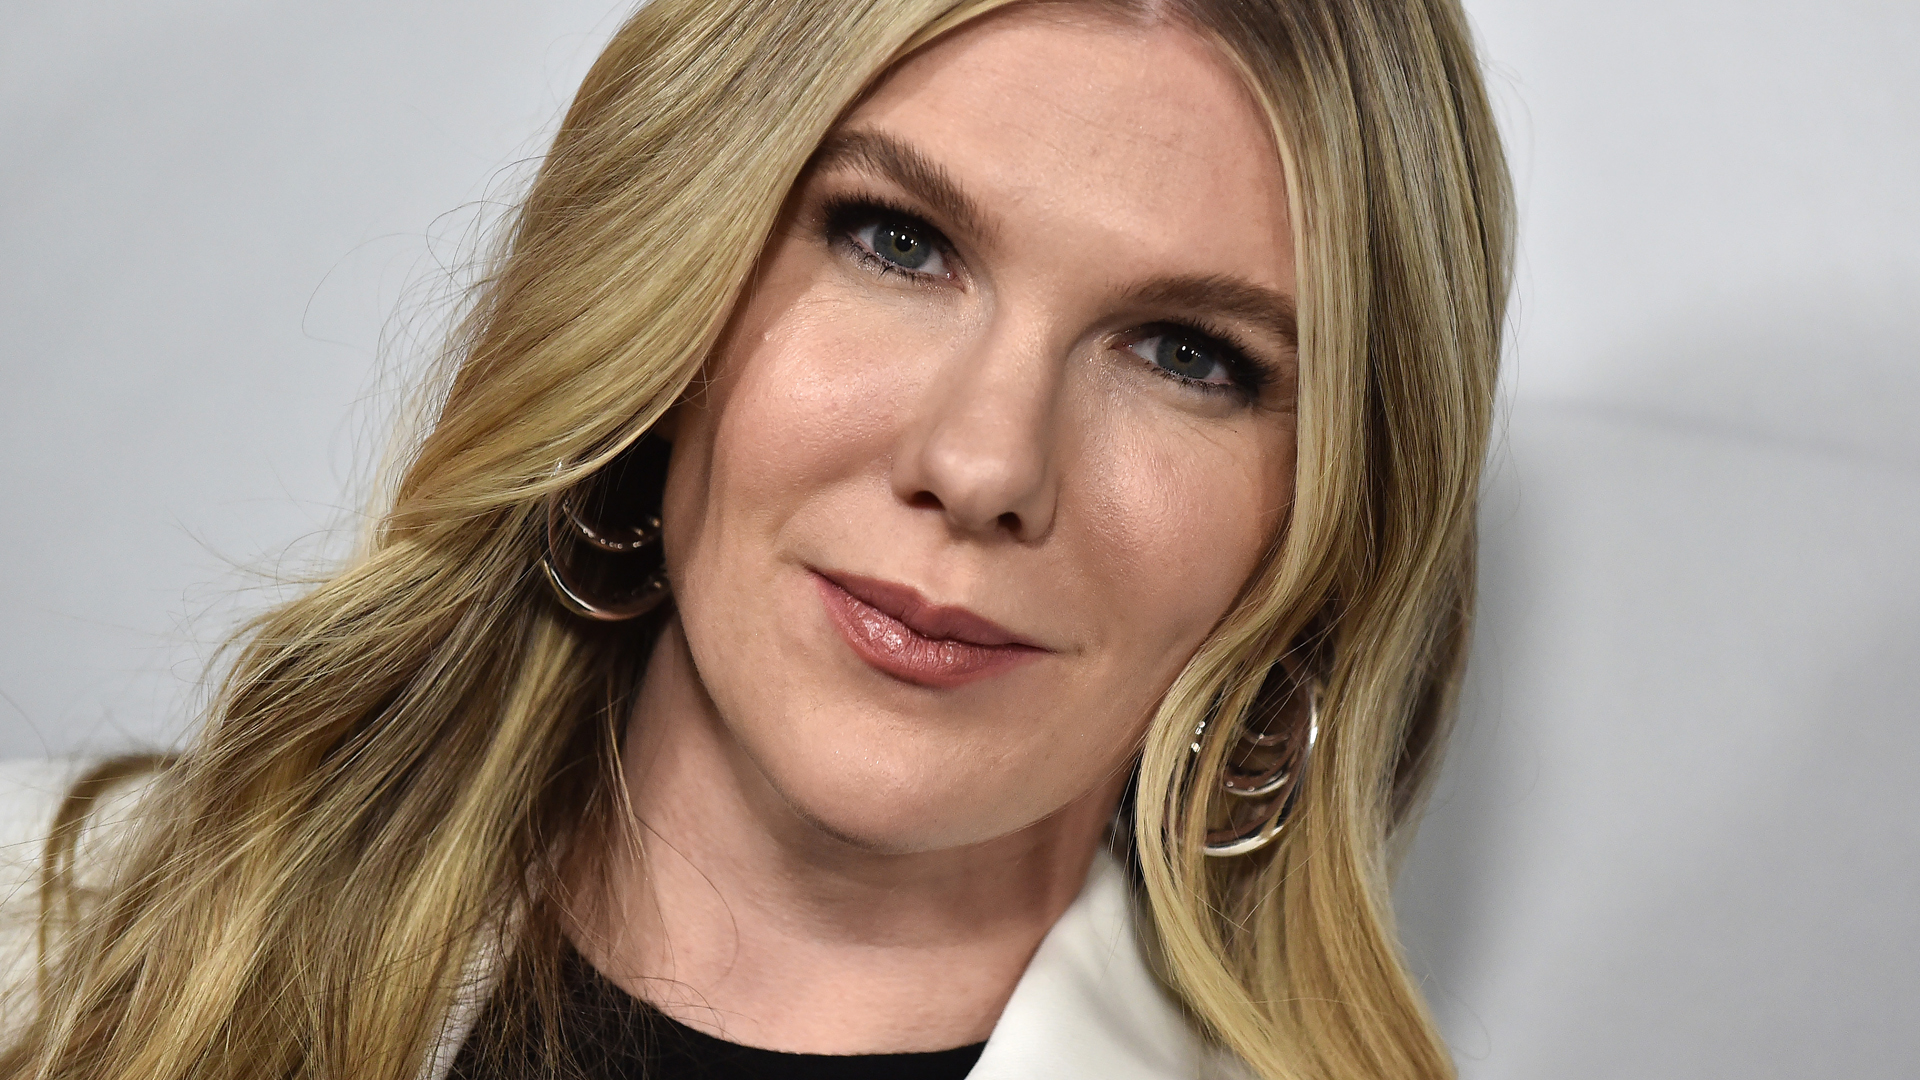 Actor Lily Rabe on the Red Carpet event  celebrating 100 episodes of FX's 'American Horror Story' in October 2019